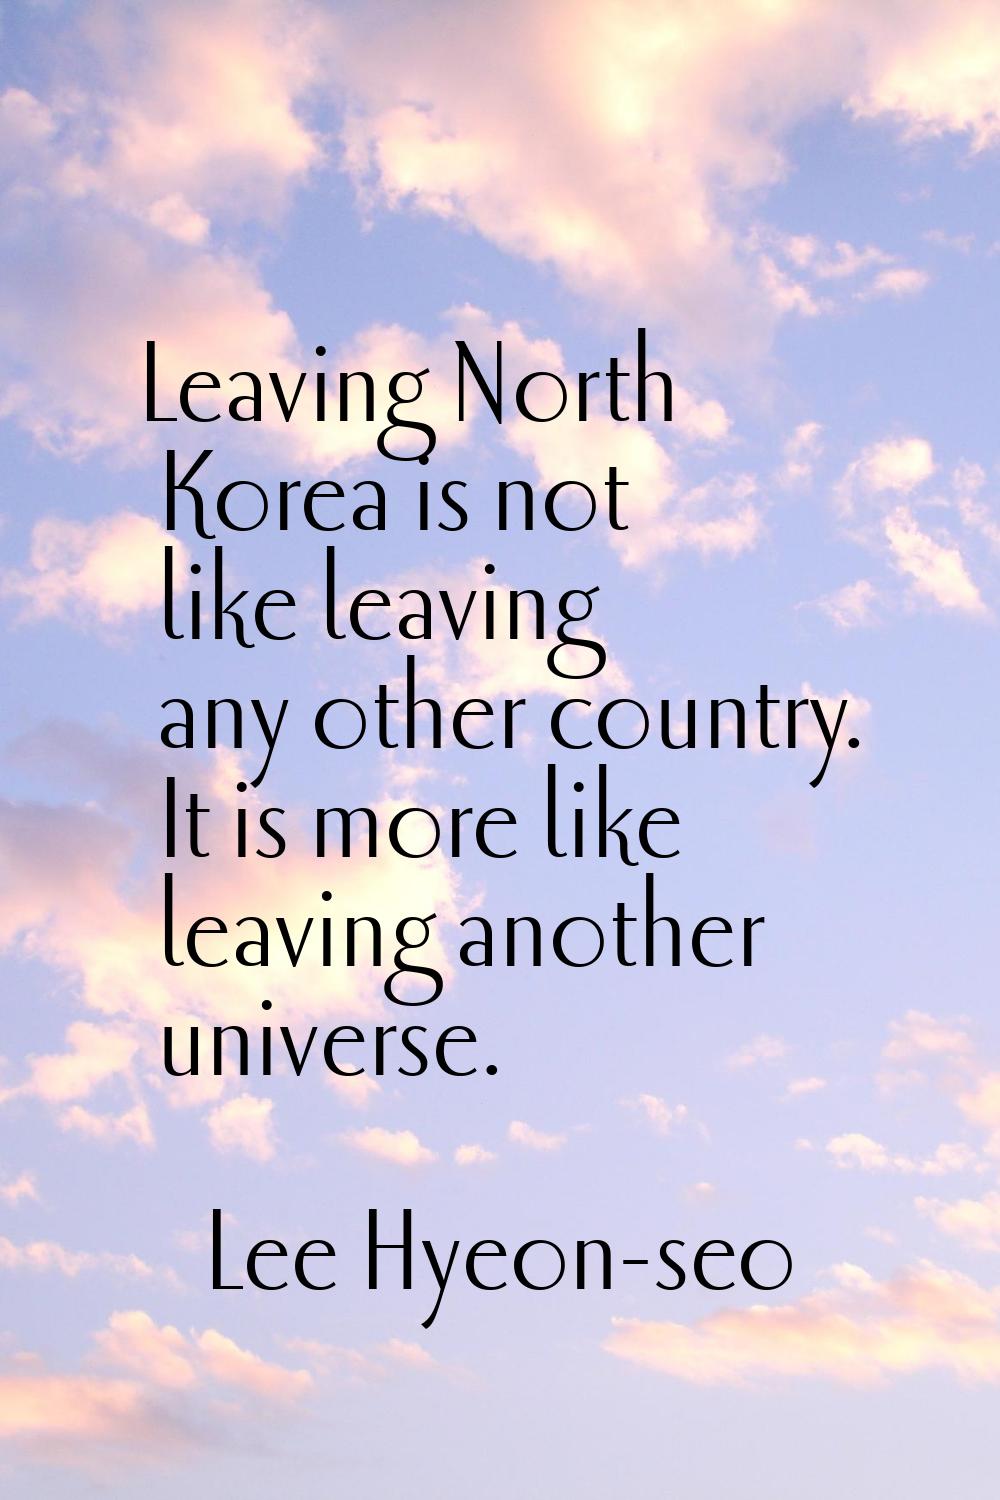 Leaving North Korea is not like leaving any other country. It is more like leaving another universe